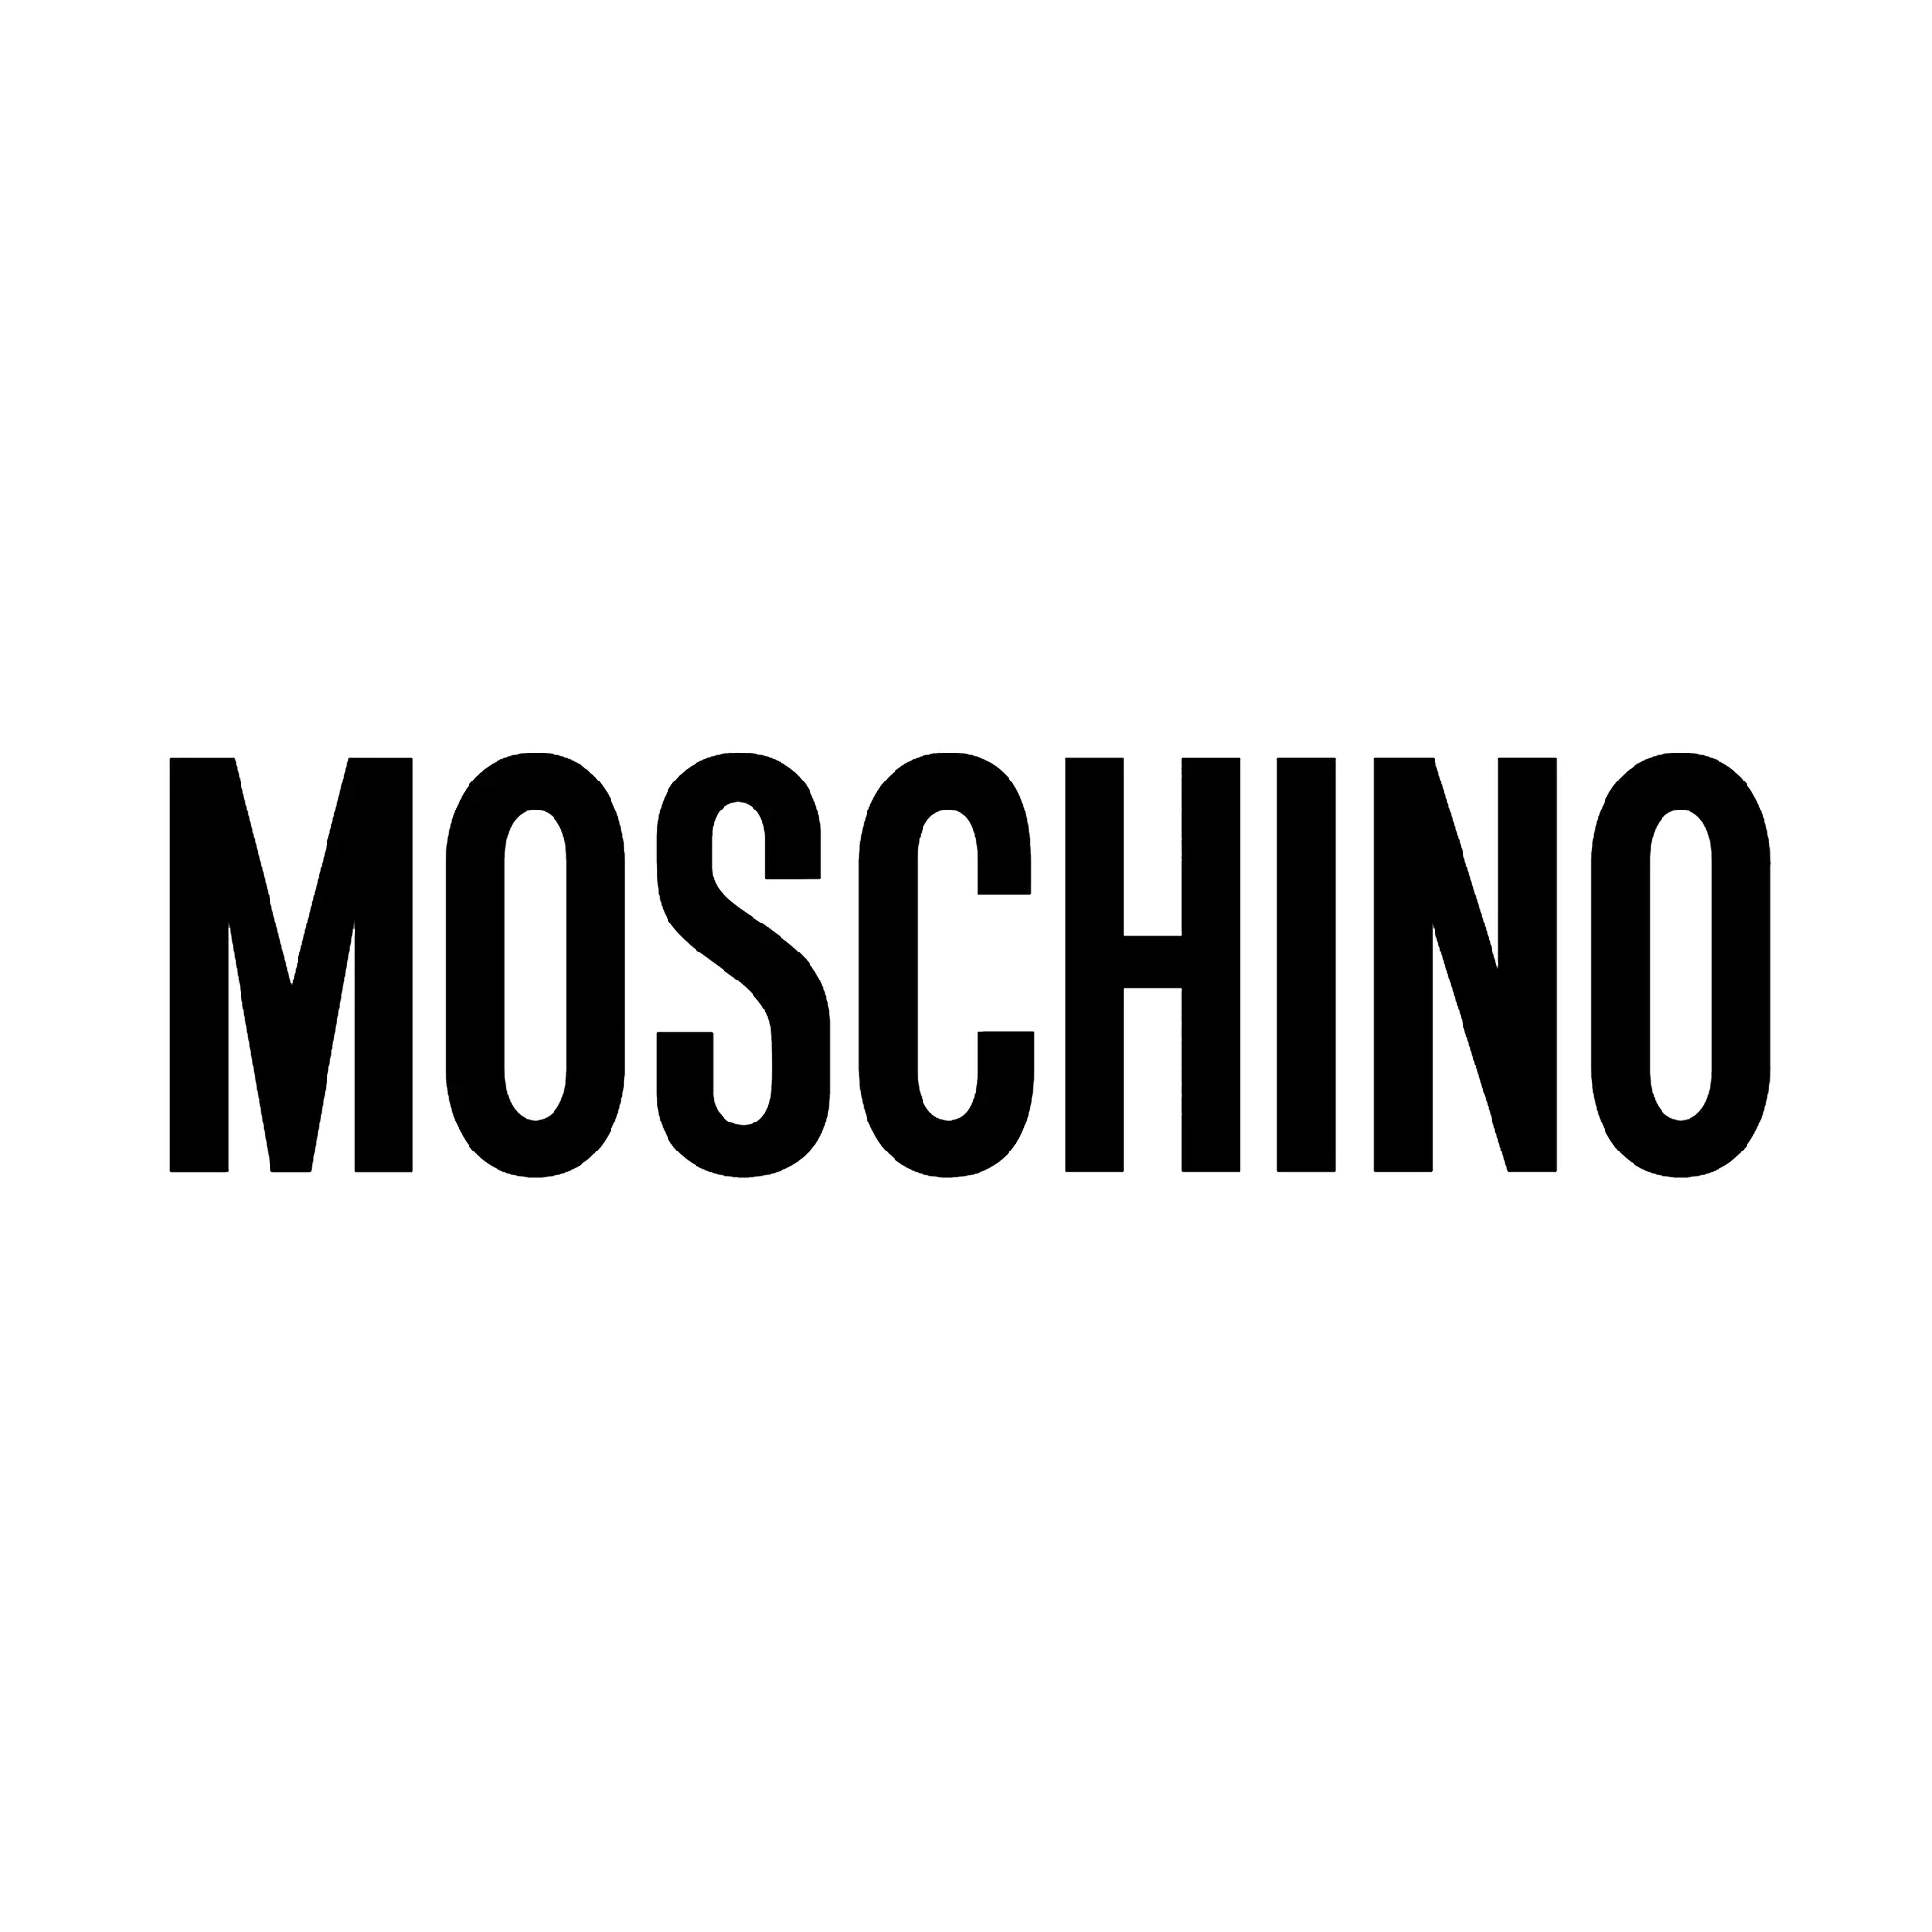 Moschino Funny EDT | Femme Fatale - Femme Fatale - 